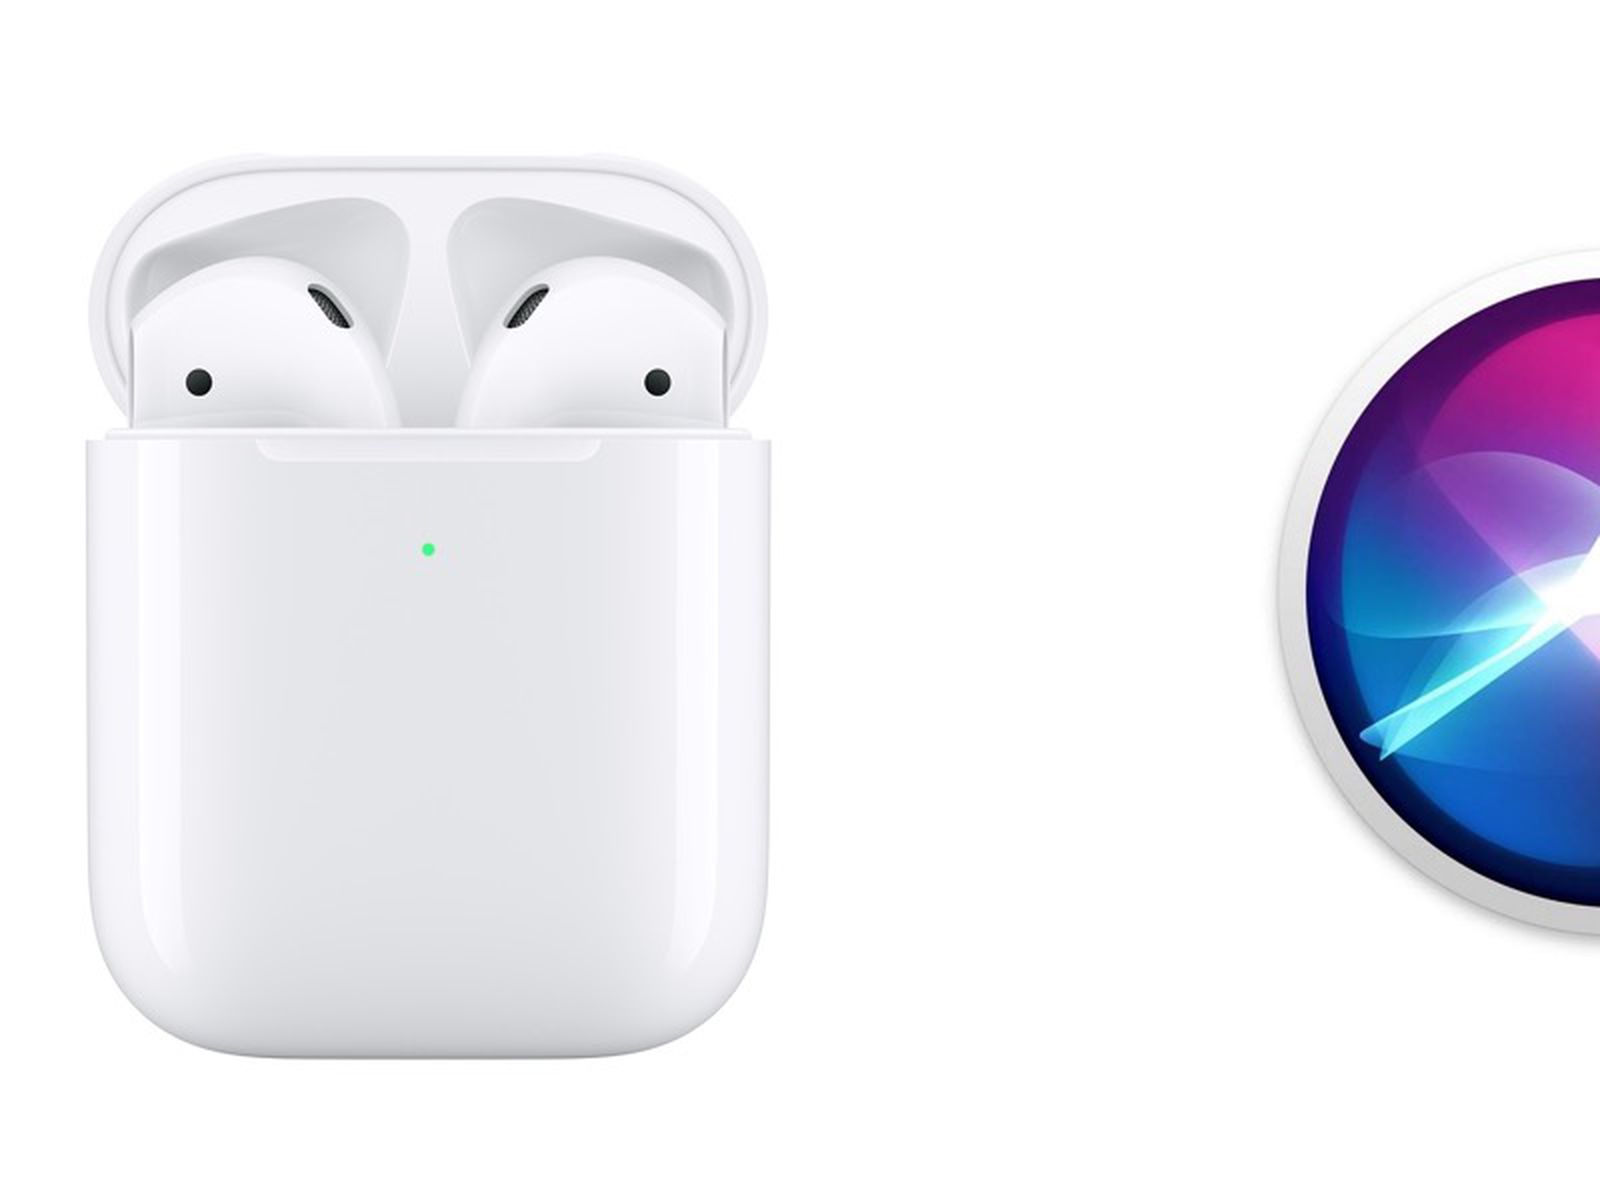 How to the 'Hey Siri' Command With AirPods (2nd Generation) and AirPods Pro - MacRumors